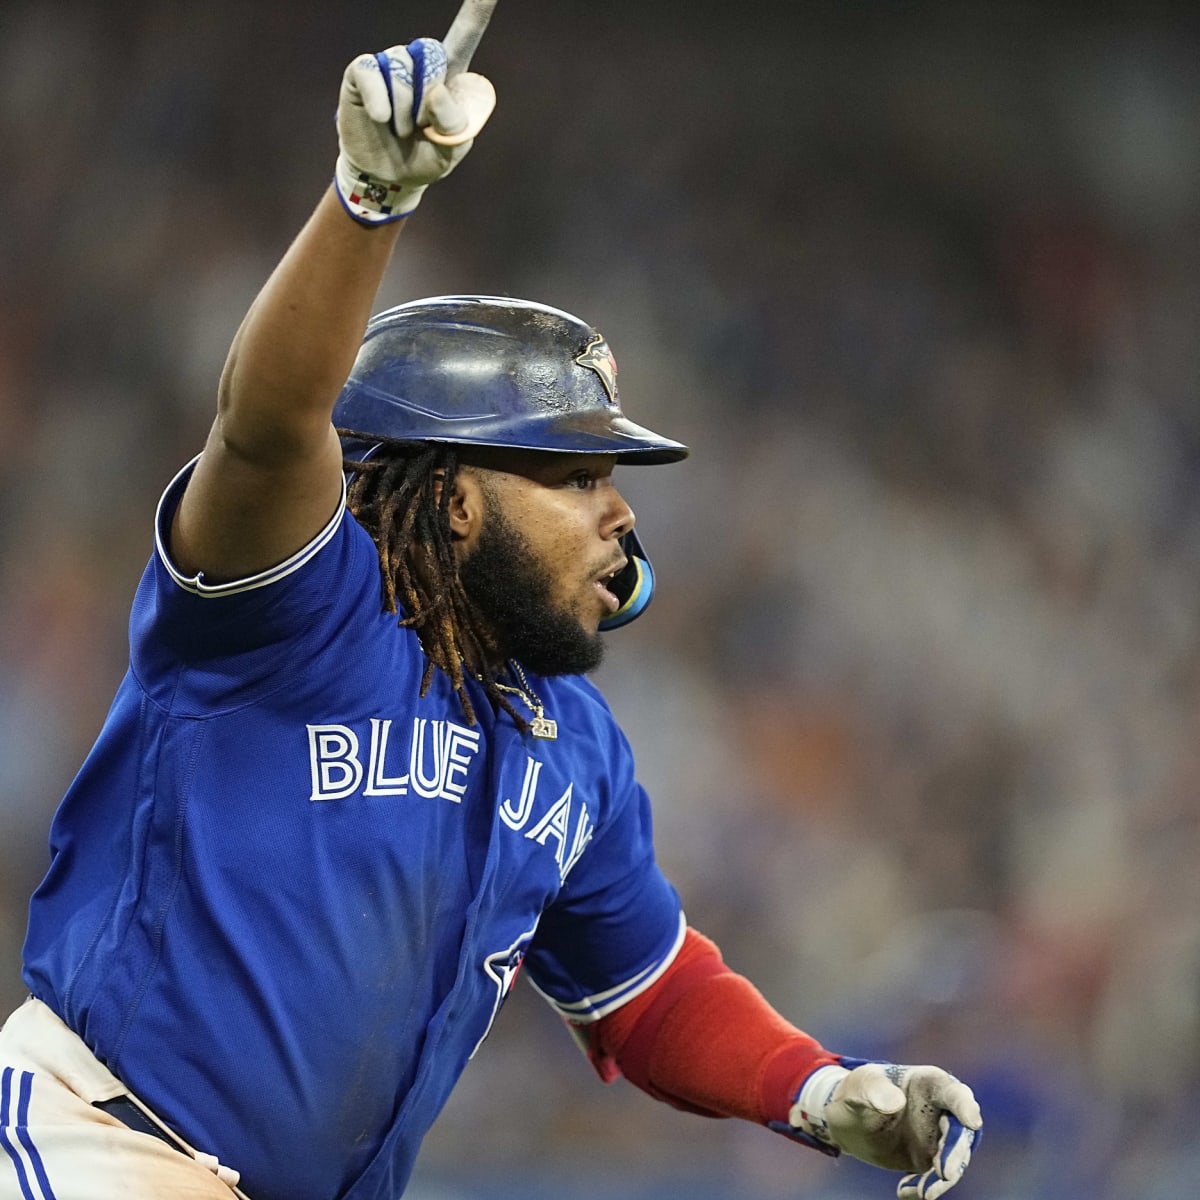 Blue Jays rewarded for sticking to process with critical win over Yankees